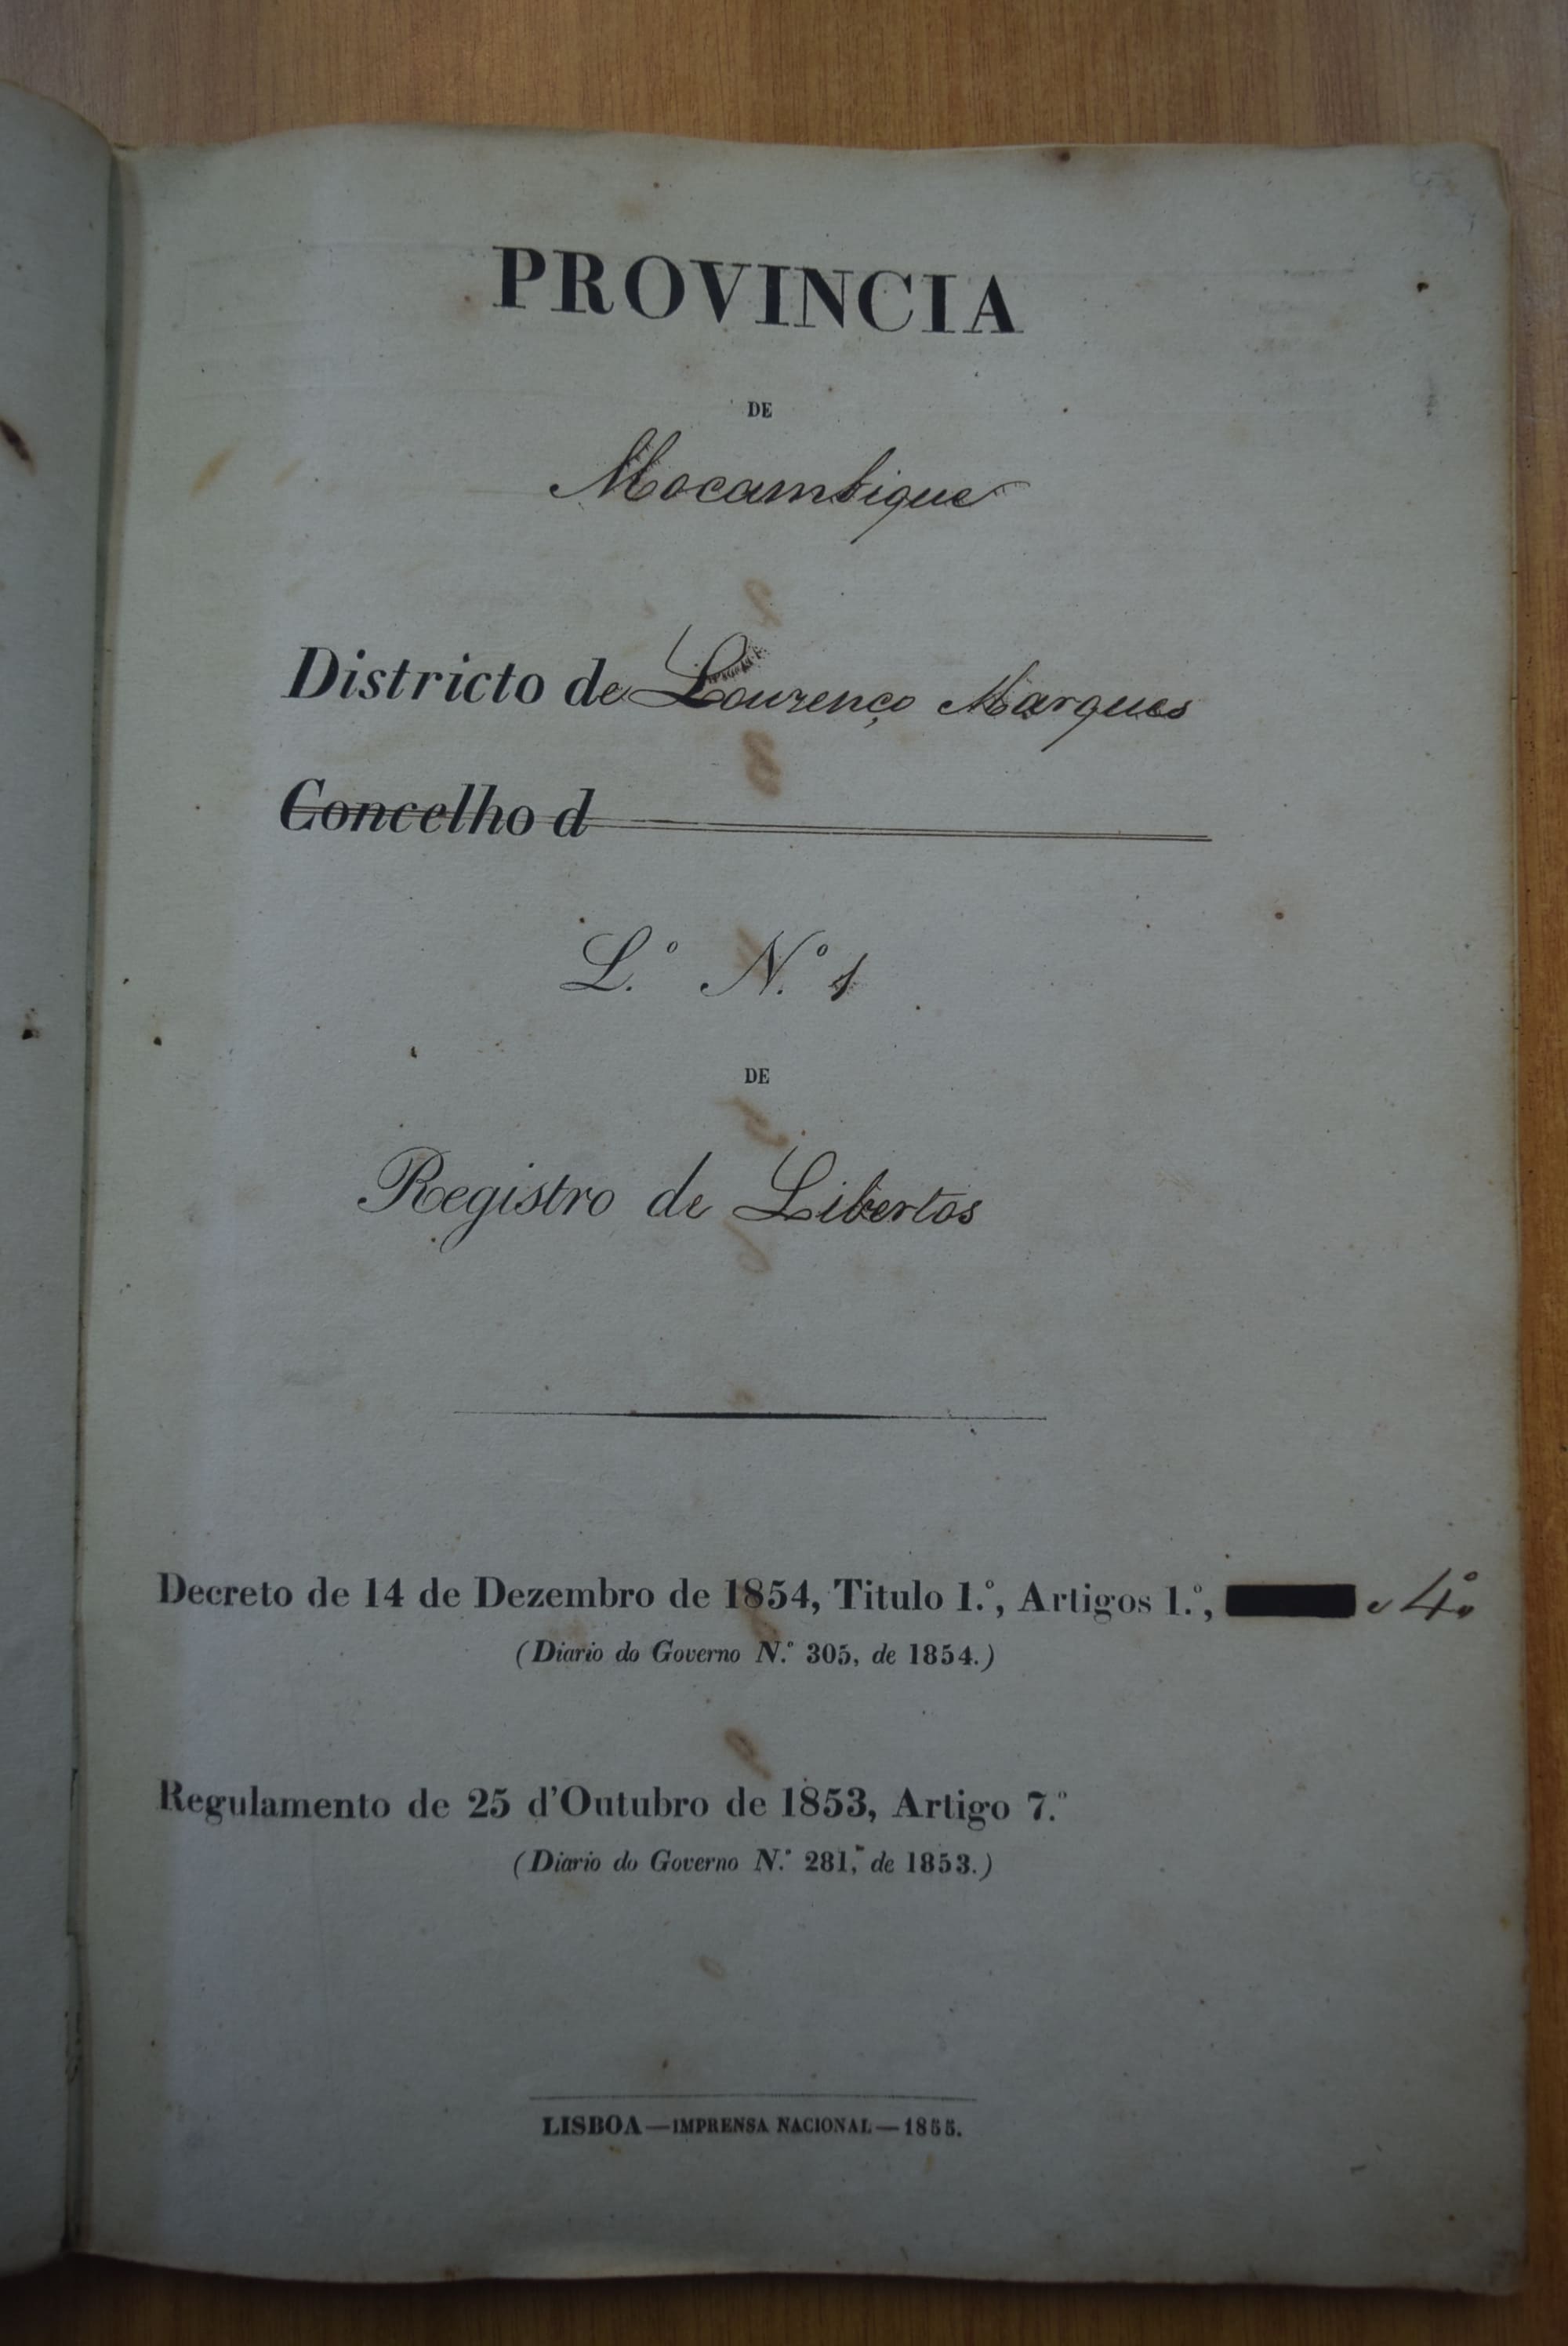 Register of Freed Africans of Lourenço Marques